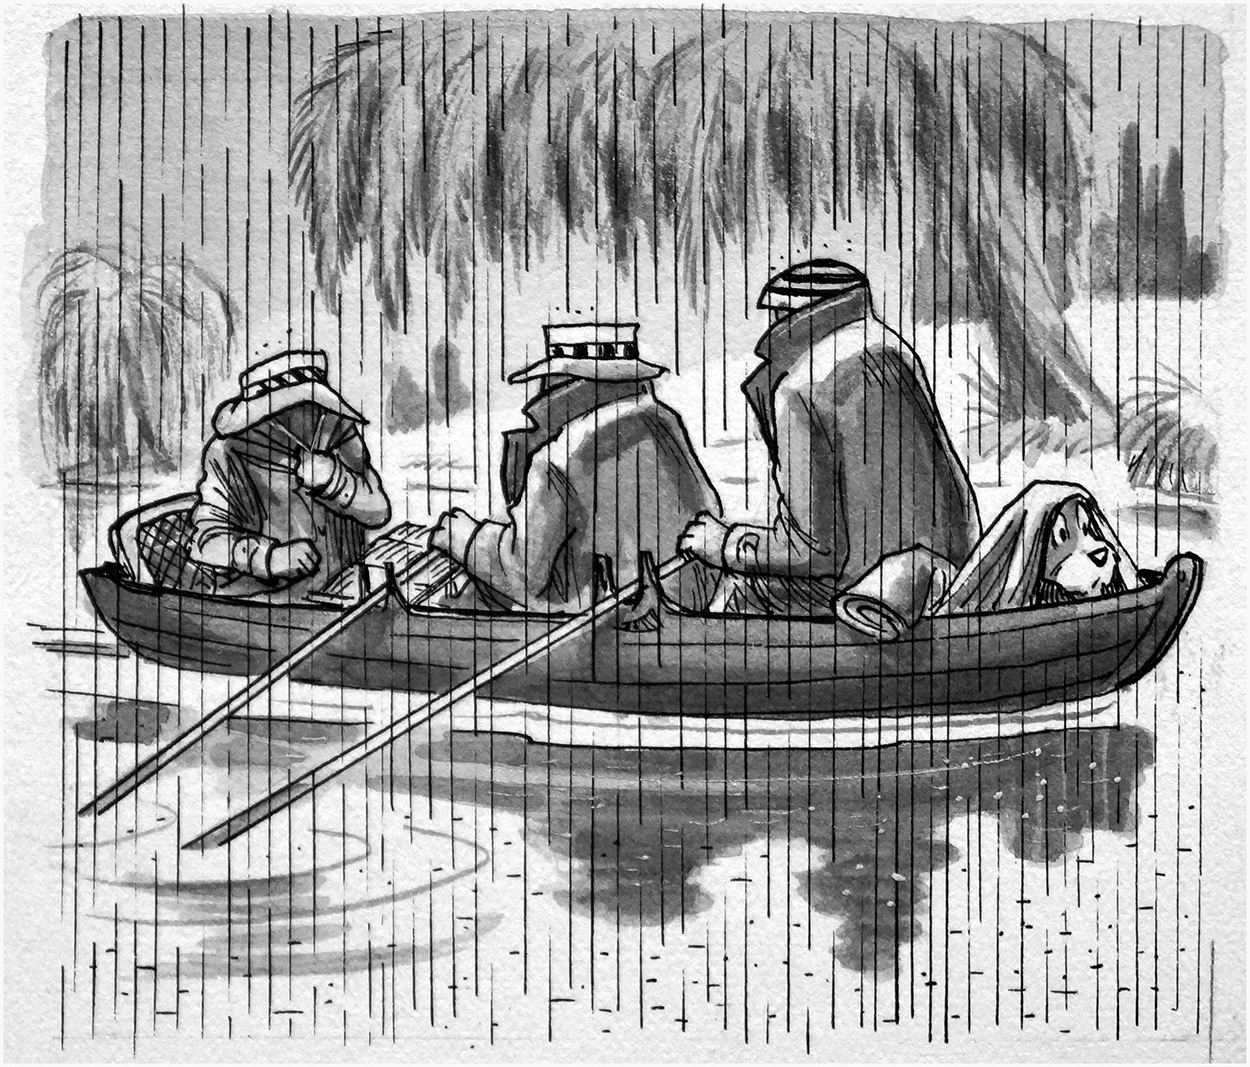 Three Men In A Boat: Good Weather For Ducks (Original) art by Three Men In A Boat (Woolcock) at The Illustration Art Gallery